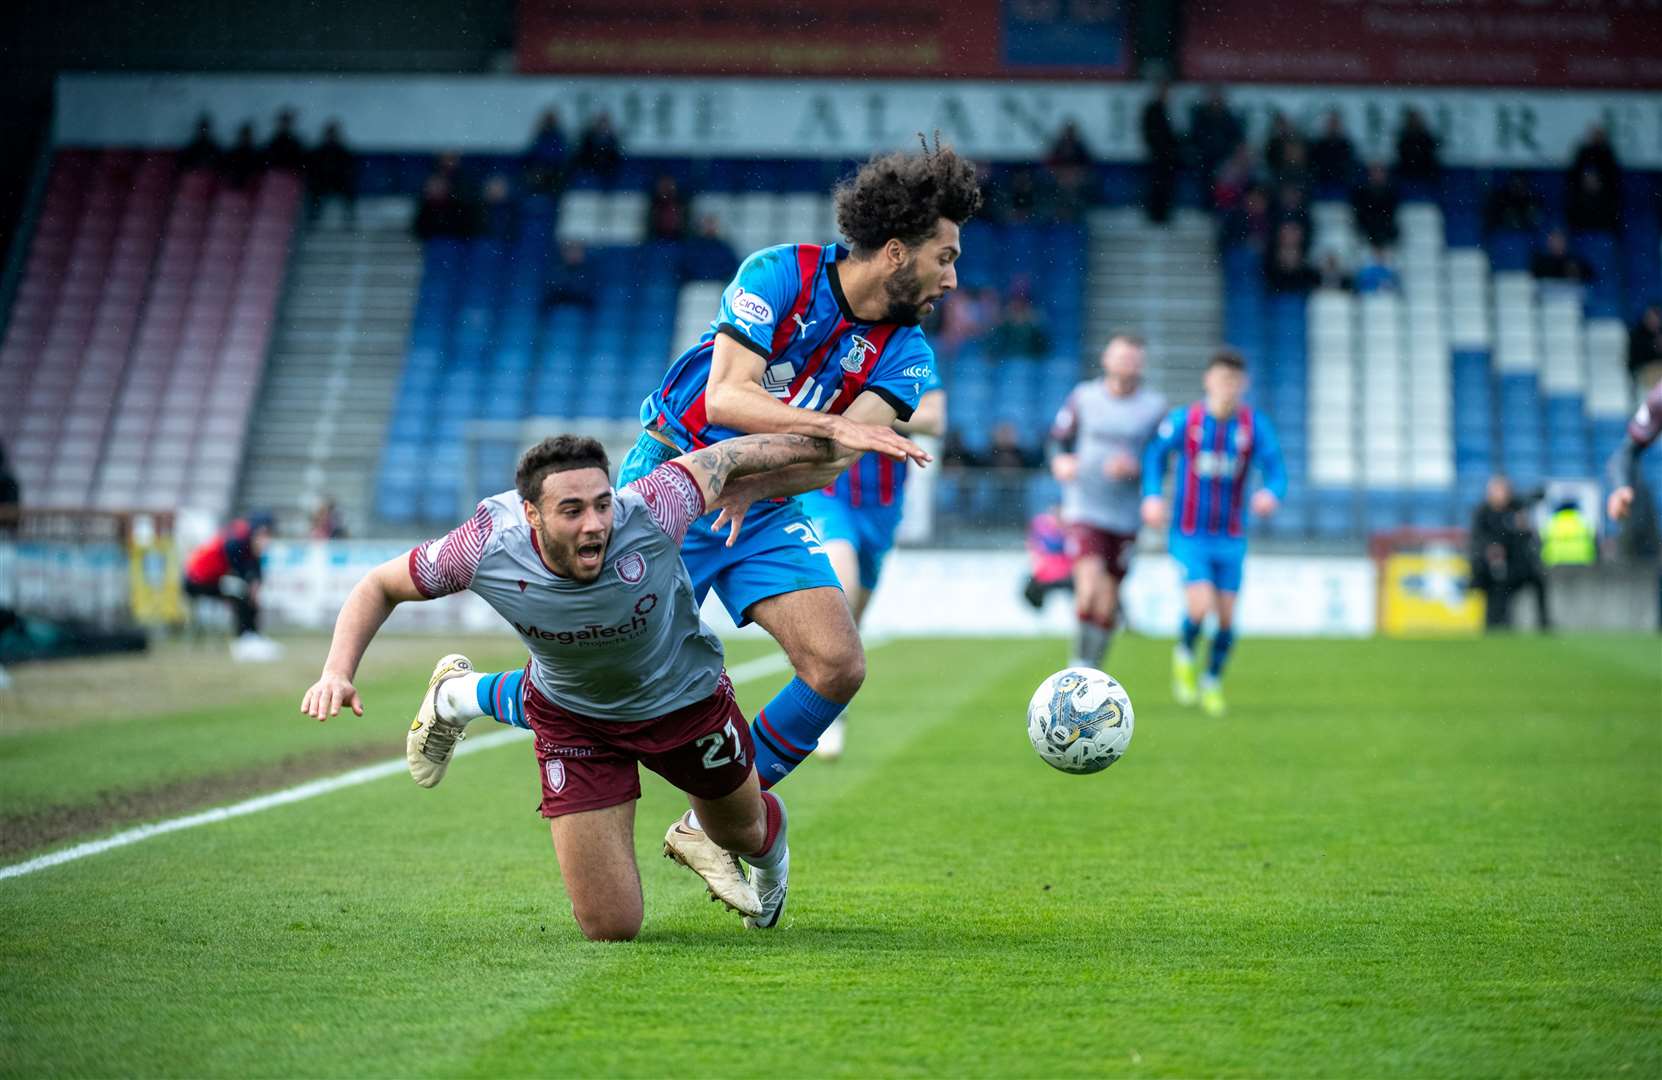 Caley defender Remi Savage and Arbroth striker Jay Bird battle for possession. Picture: Callum Mackay.